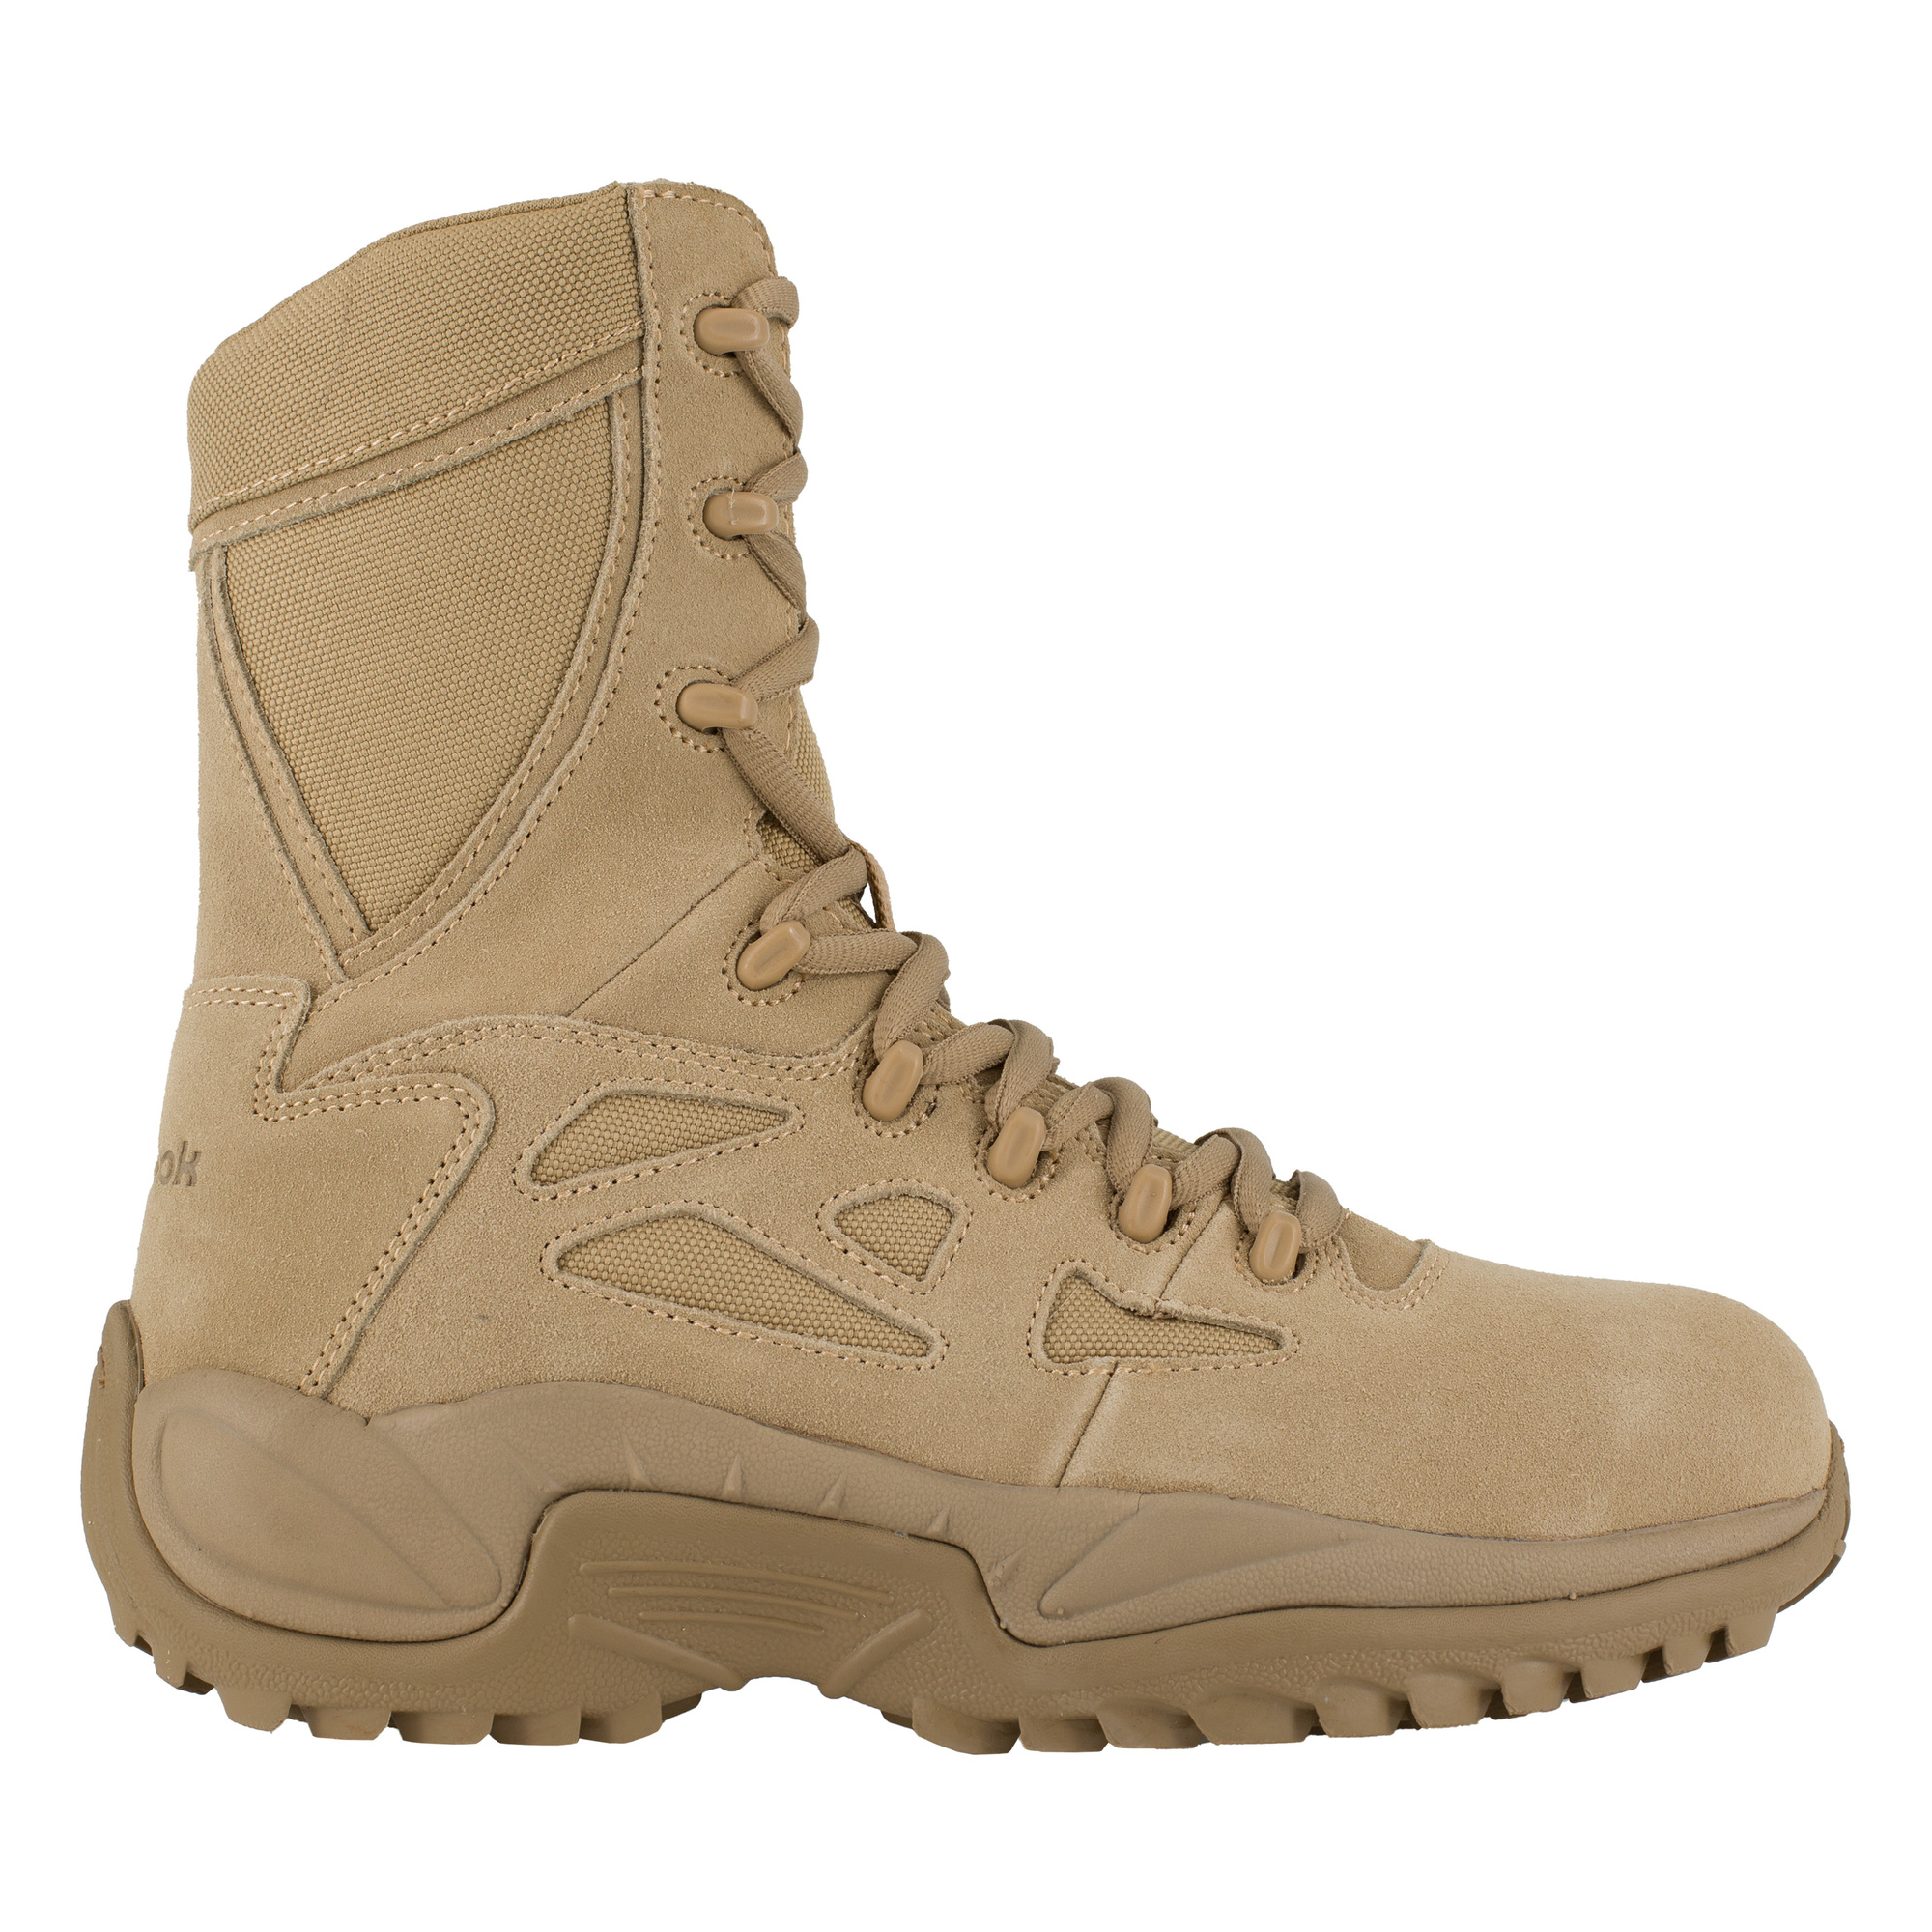 Reebok, 8Inch Stealth Tactical Boot with Side Zipper, Size 5 1/2, Width Medium, Color Desert Tan, Model RB894